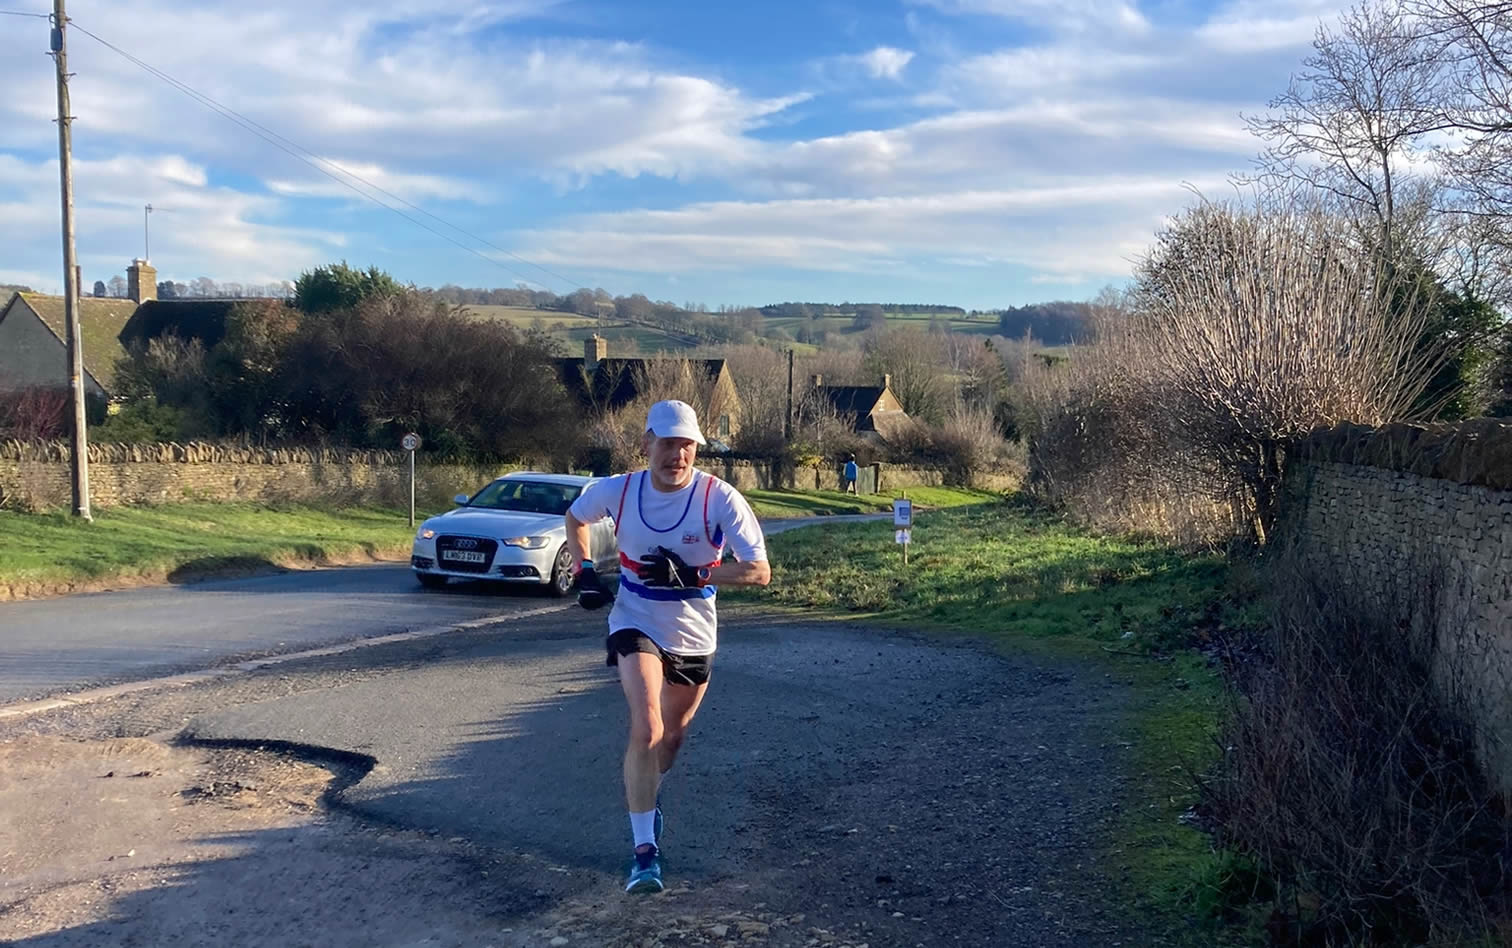 Dennis Walmsley finishing at BRR Social Relay, Guiting Power - 2nd January 2023